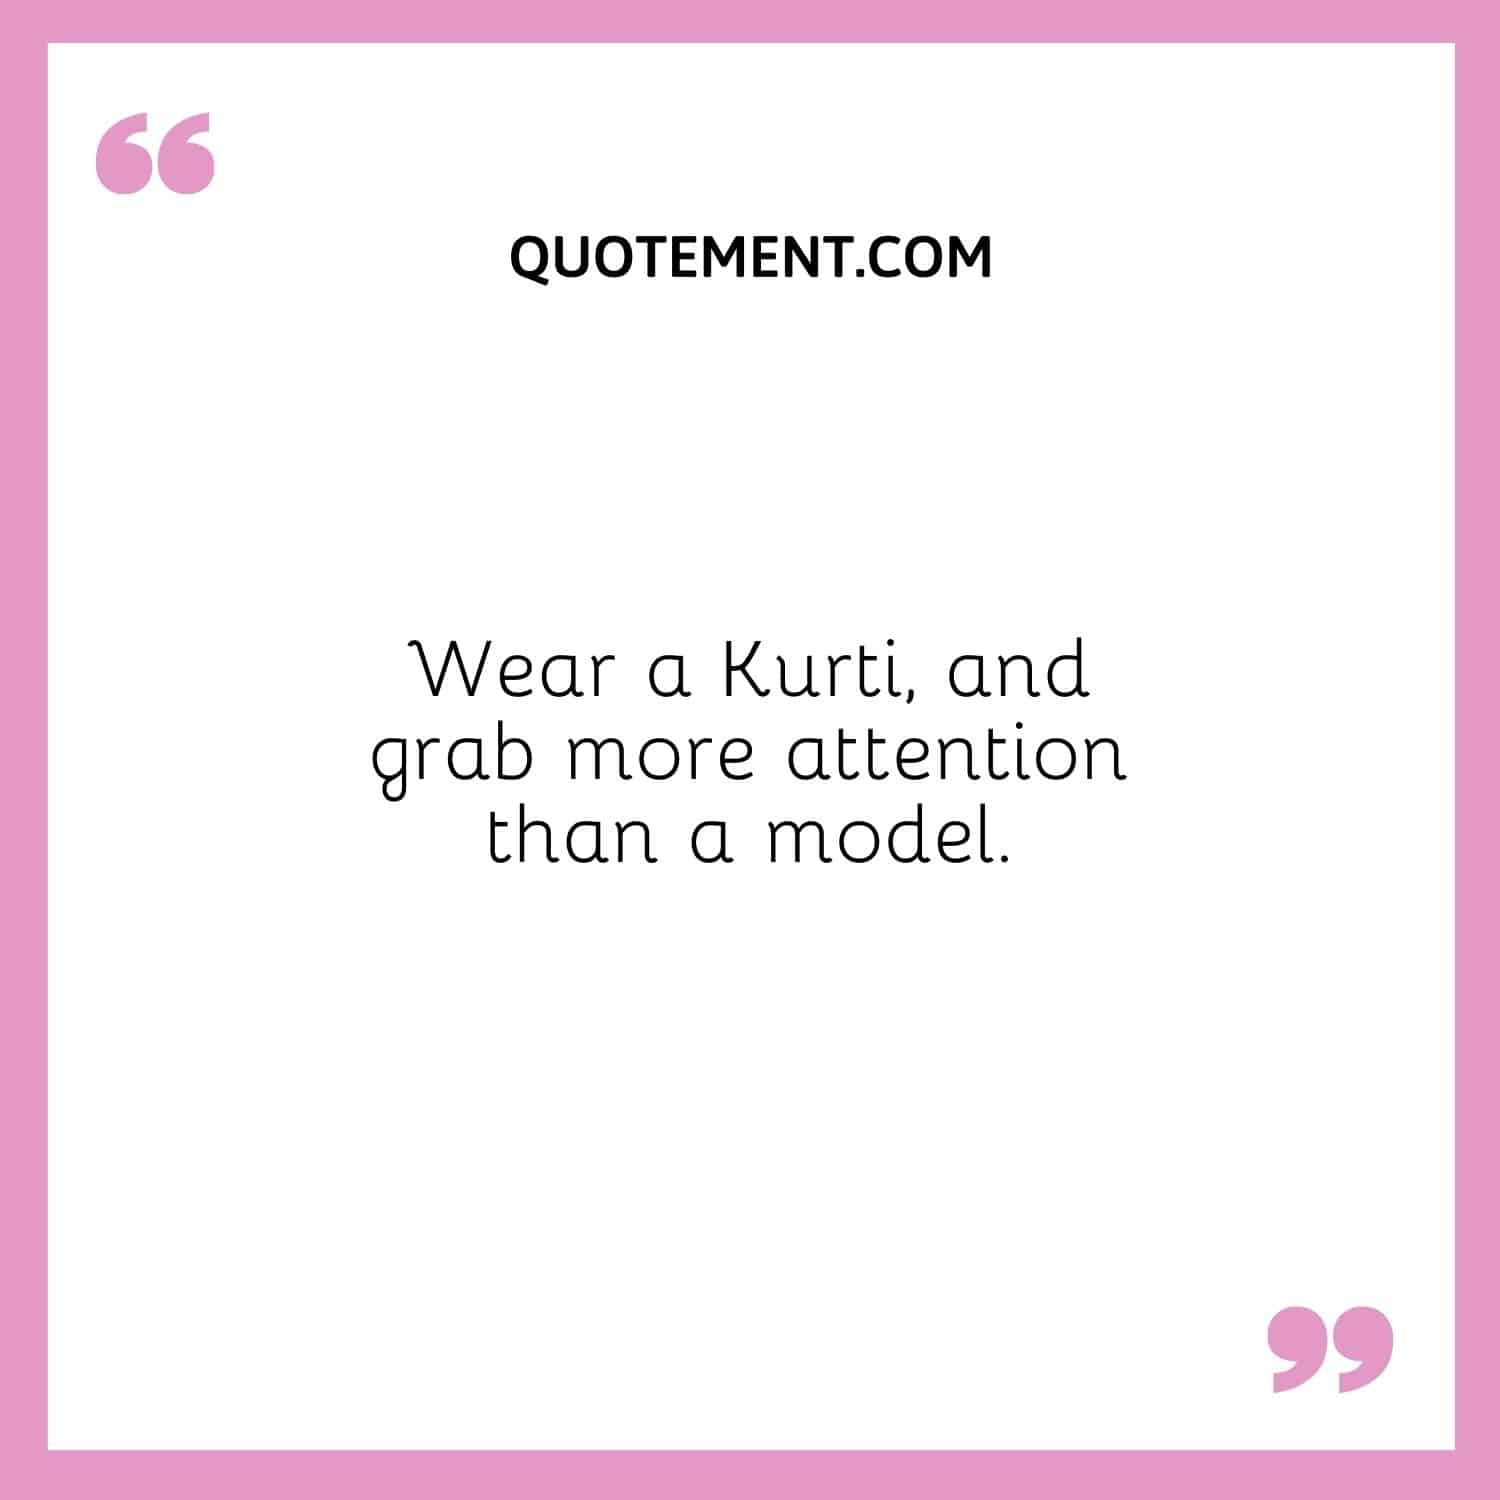 Wear a Kurti, and grab more attention than a model.